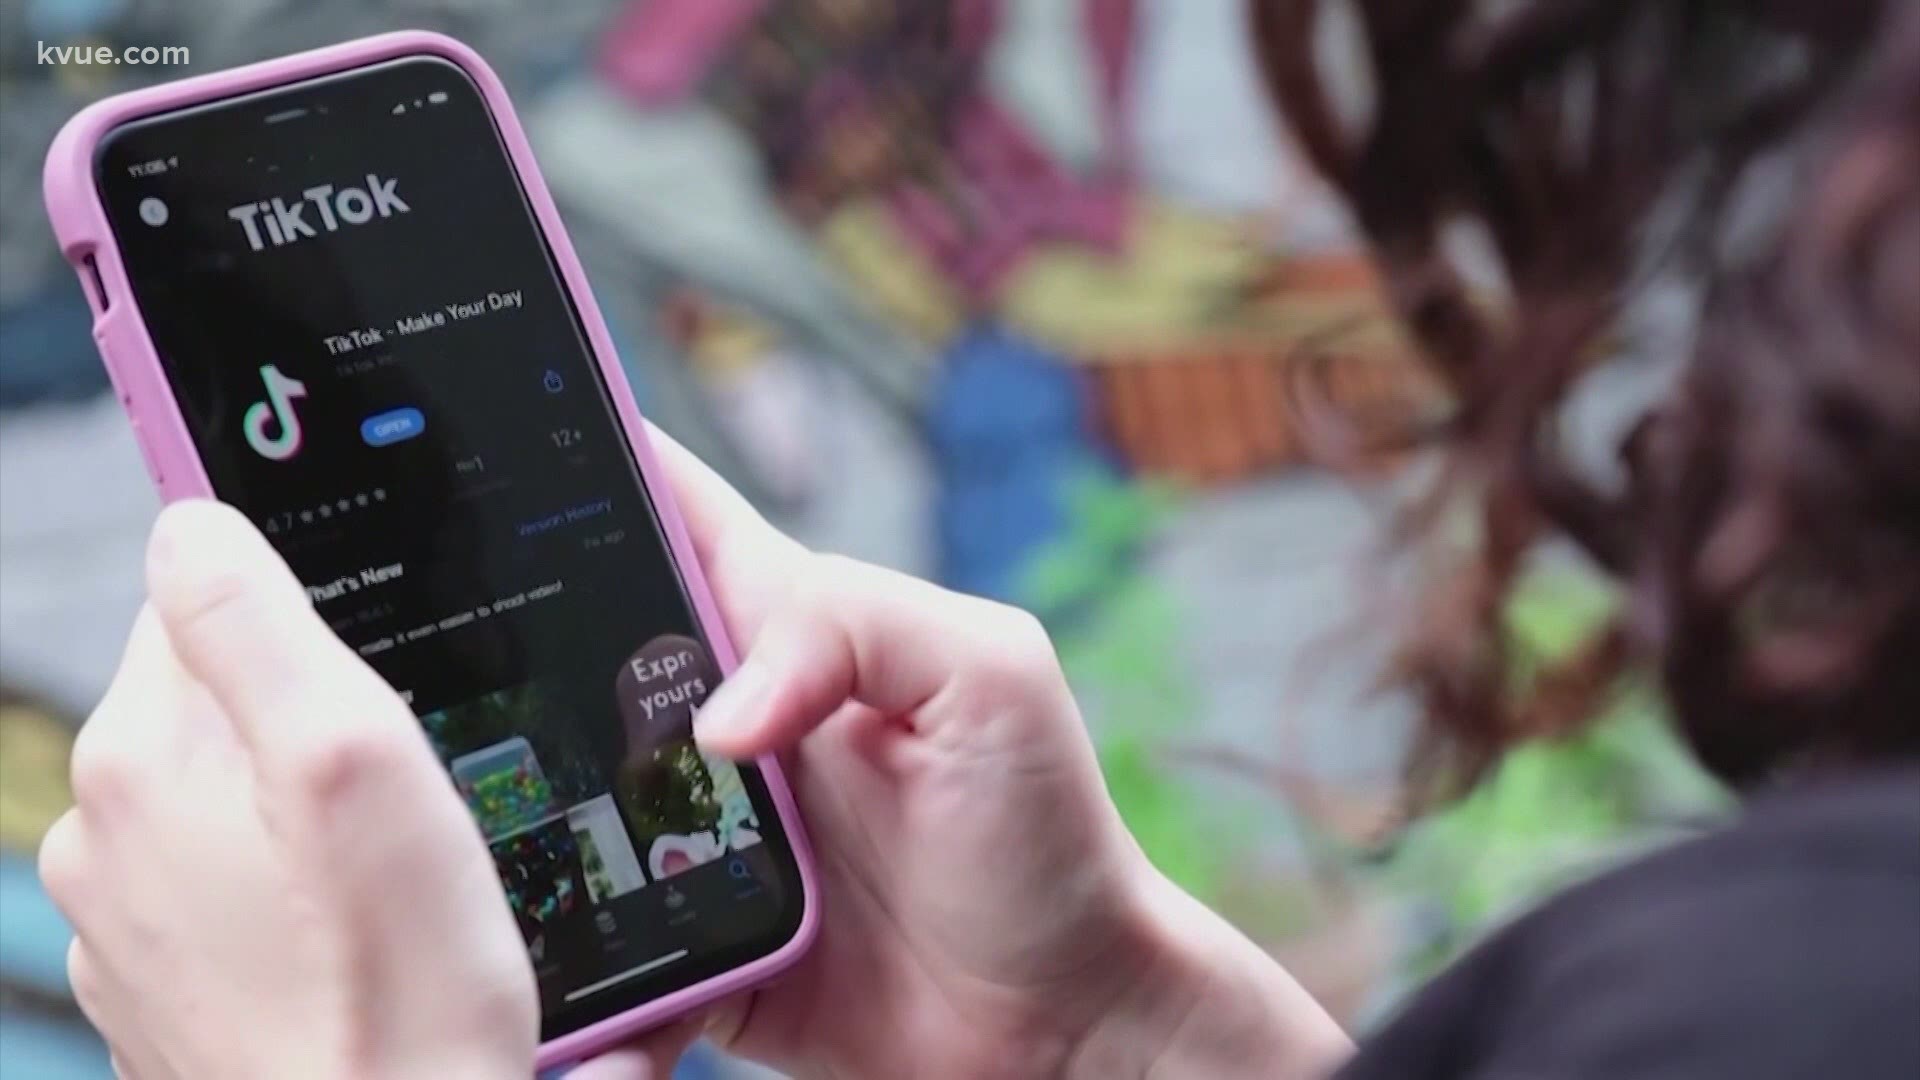 TikTok will soon be banned from downloads and updates in the U.S.